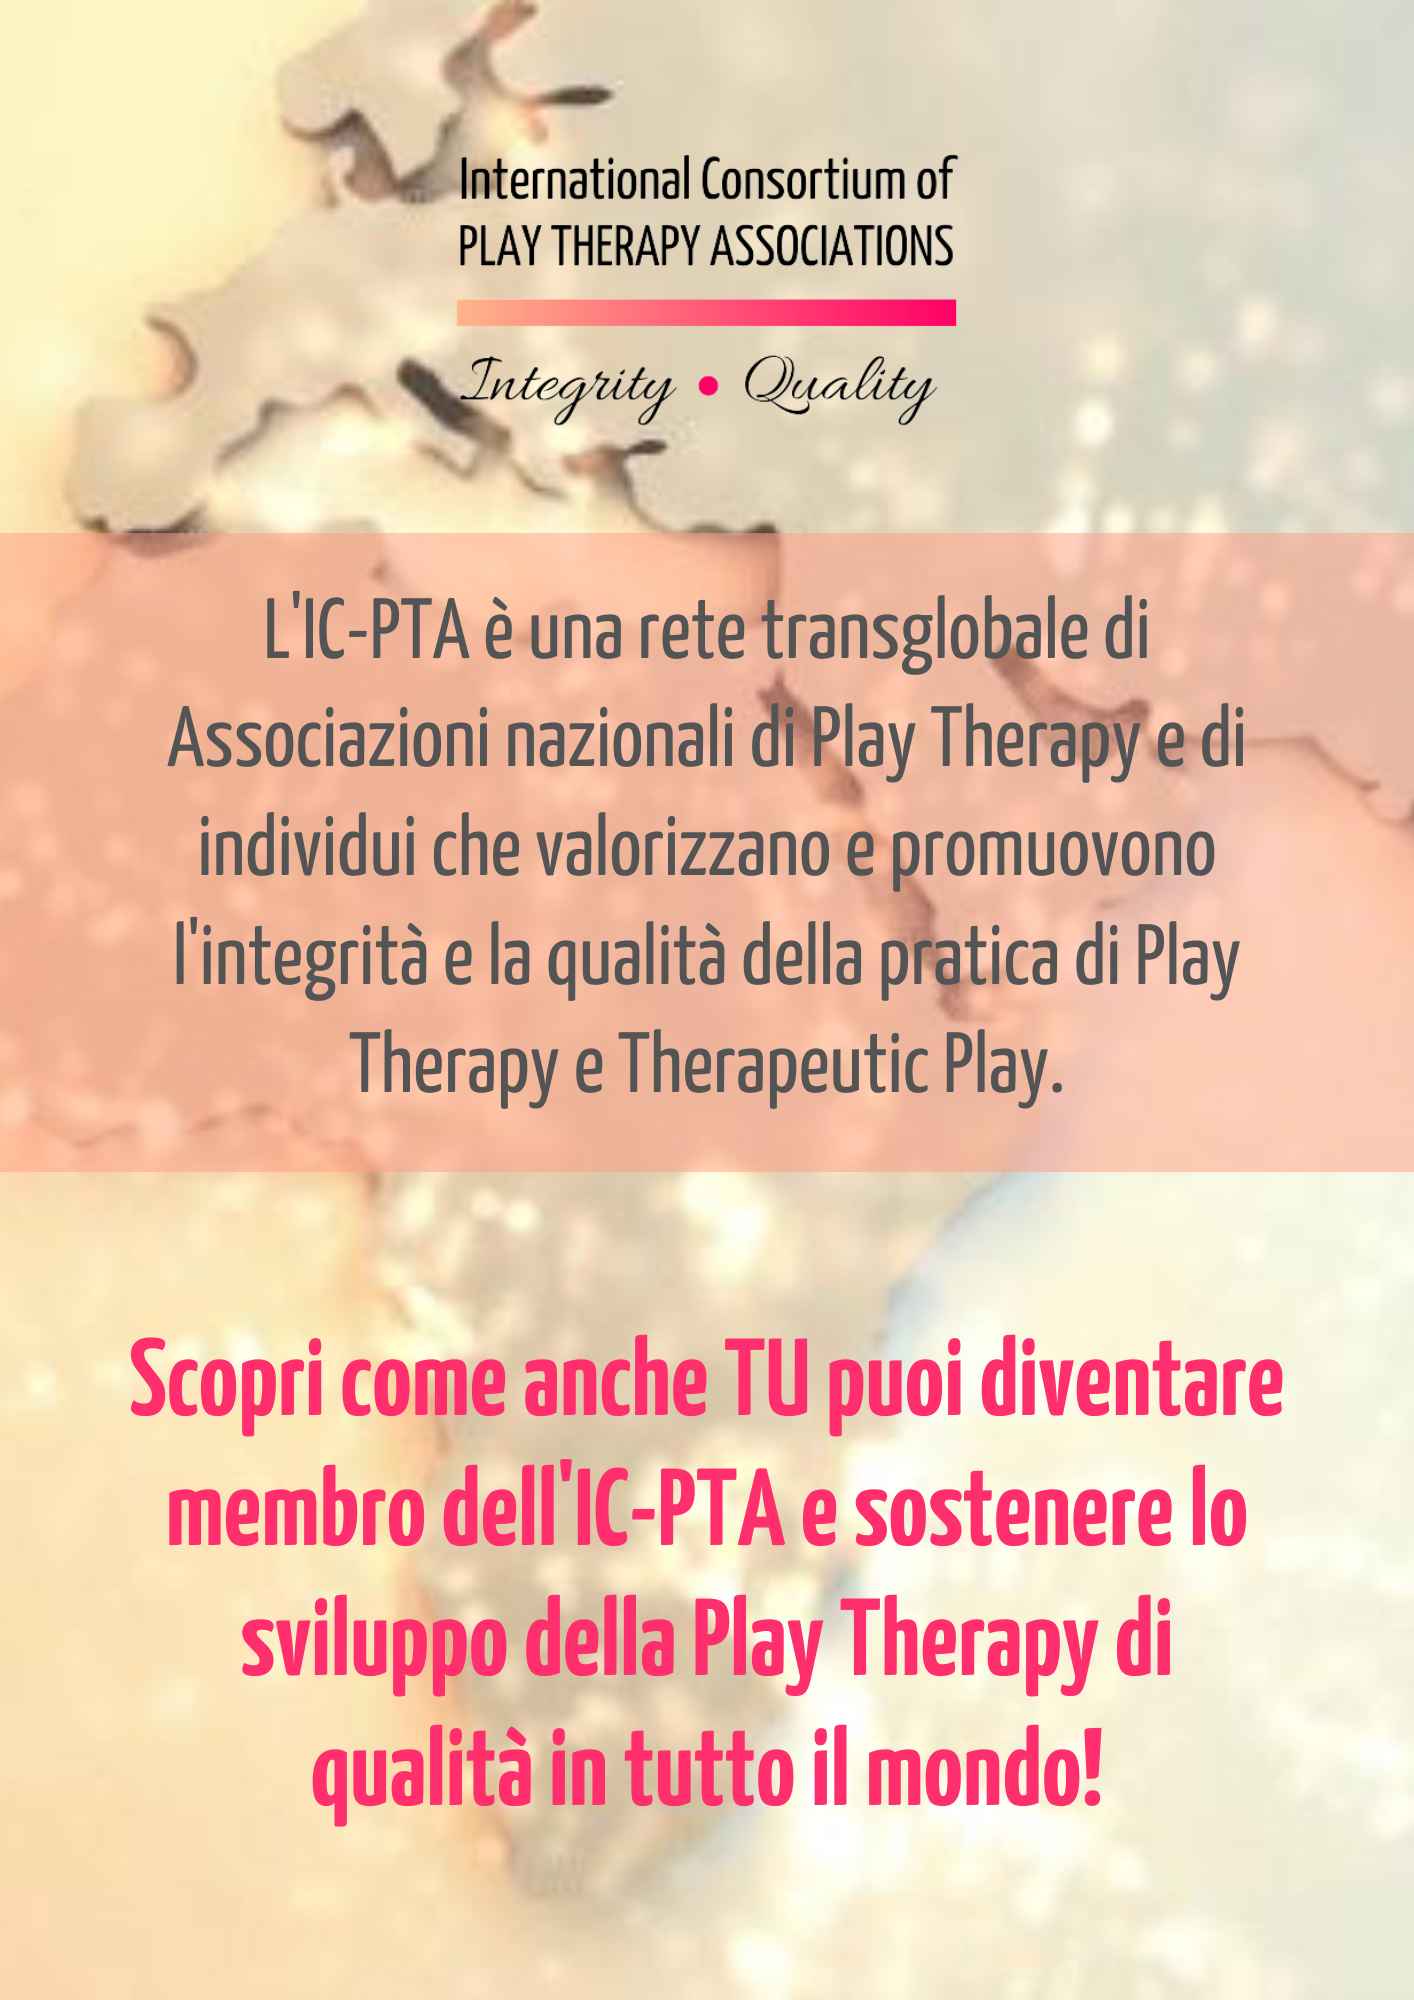 international consortium for play therapy associations